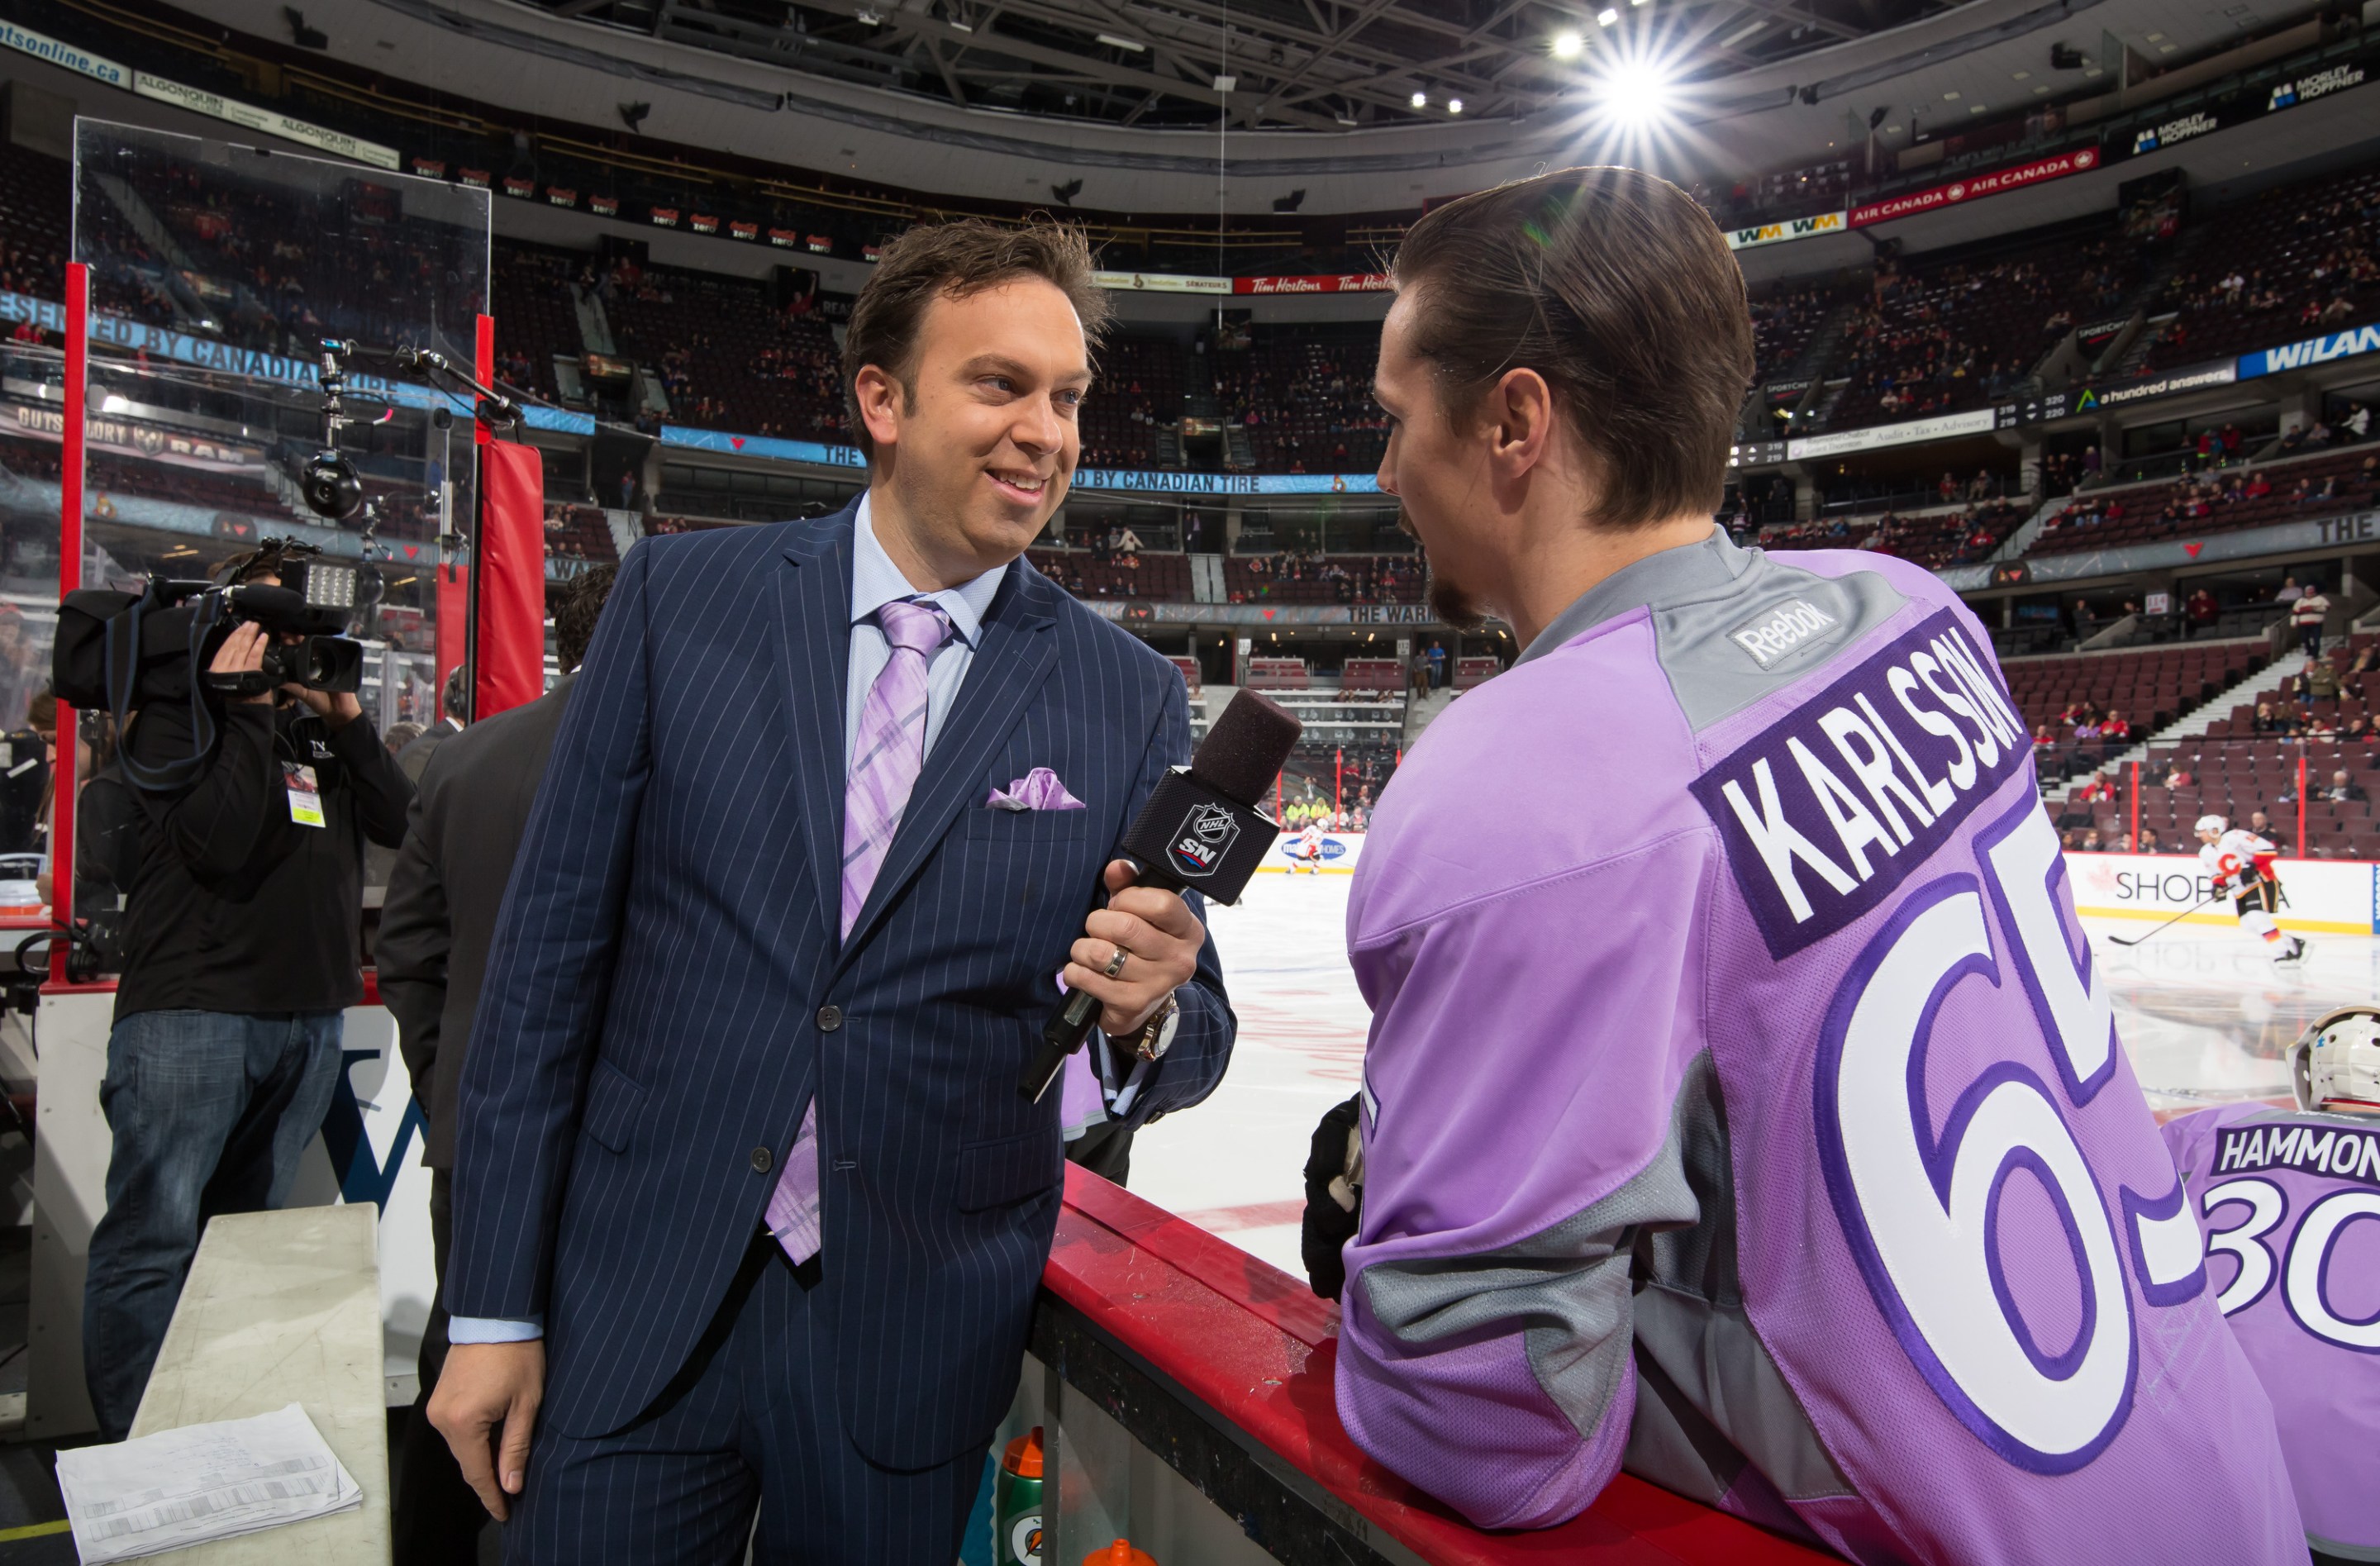 OTTAWA, ON - OCTOBER 28: Elliotte Friedman interview Erik Karlsson #65 of the Ottawa Senators on Hockey Fights Cancer night prior to a game against the Calgary Flames at Canadian Tire Centre on October 28, 2015 in Ottawa, Ontario, Canada. (Photo by Andre Ringuette/NHLI via Getty Images)